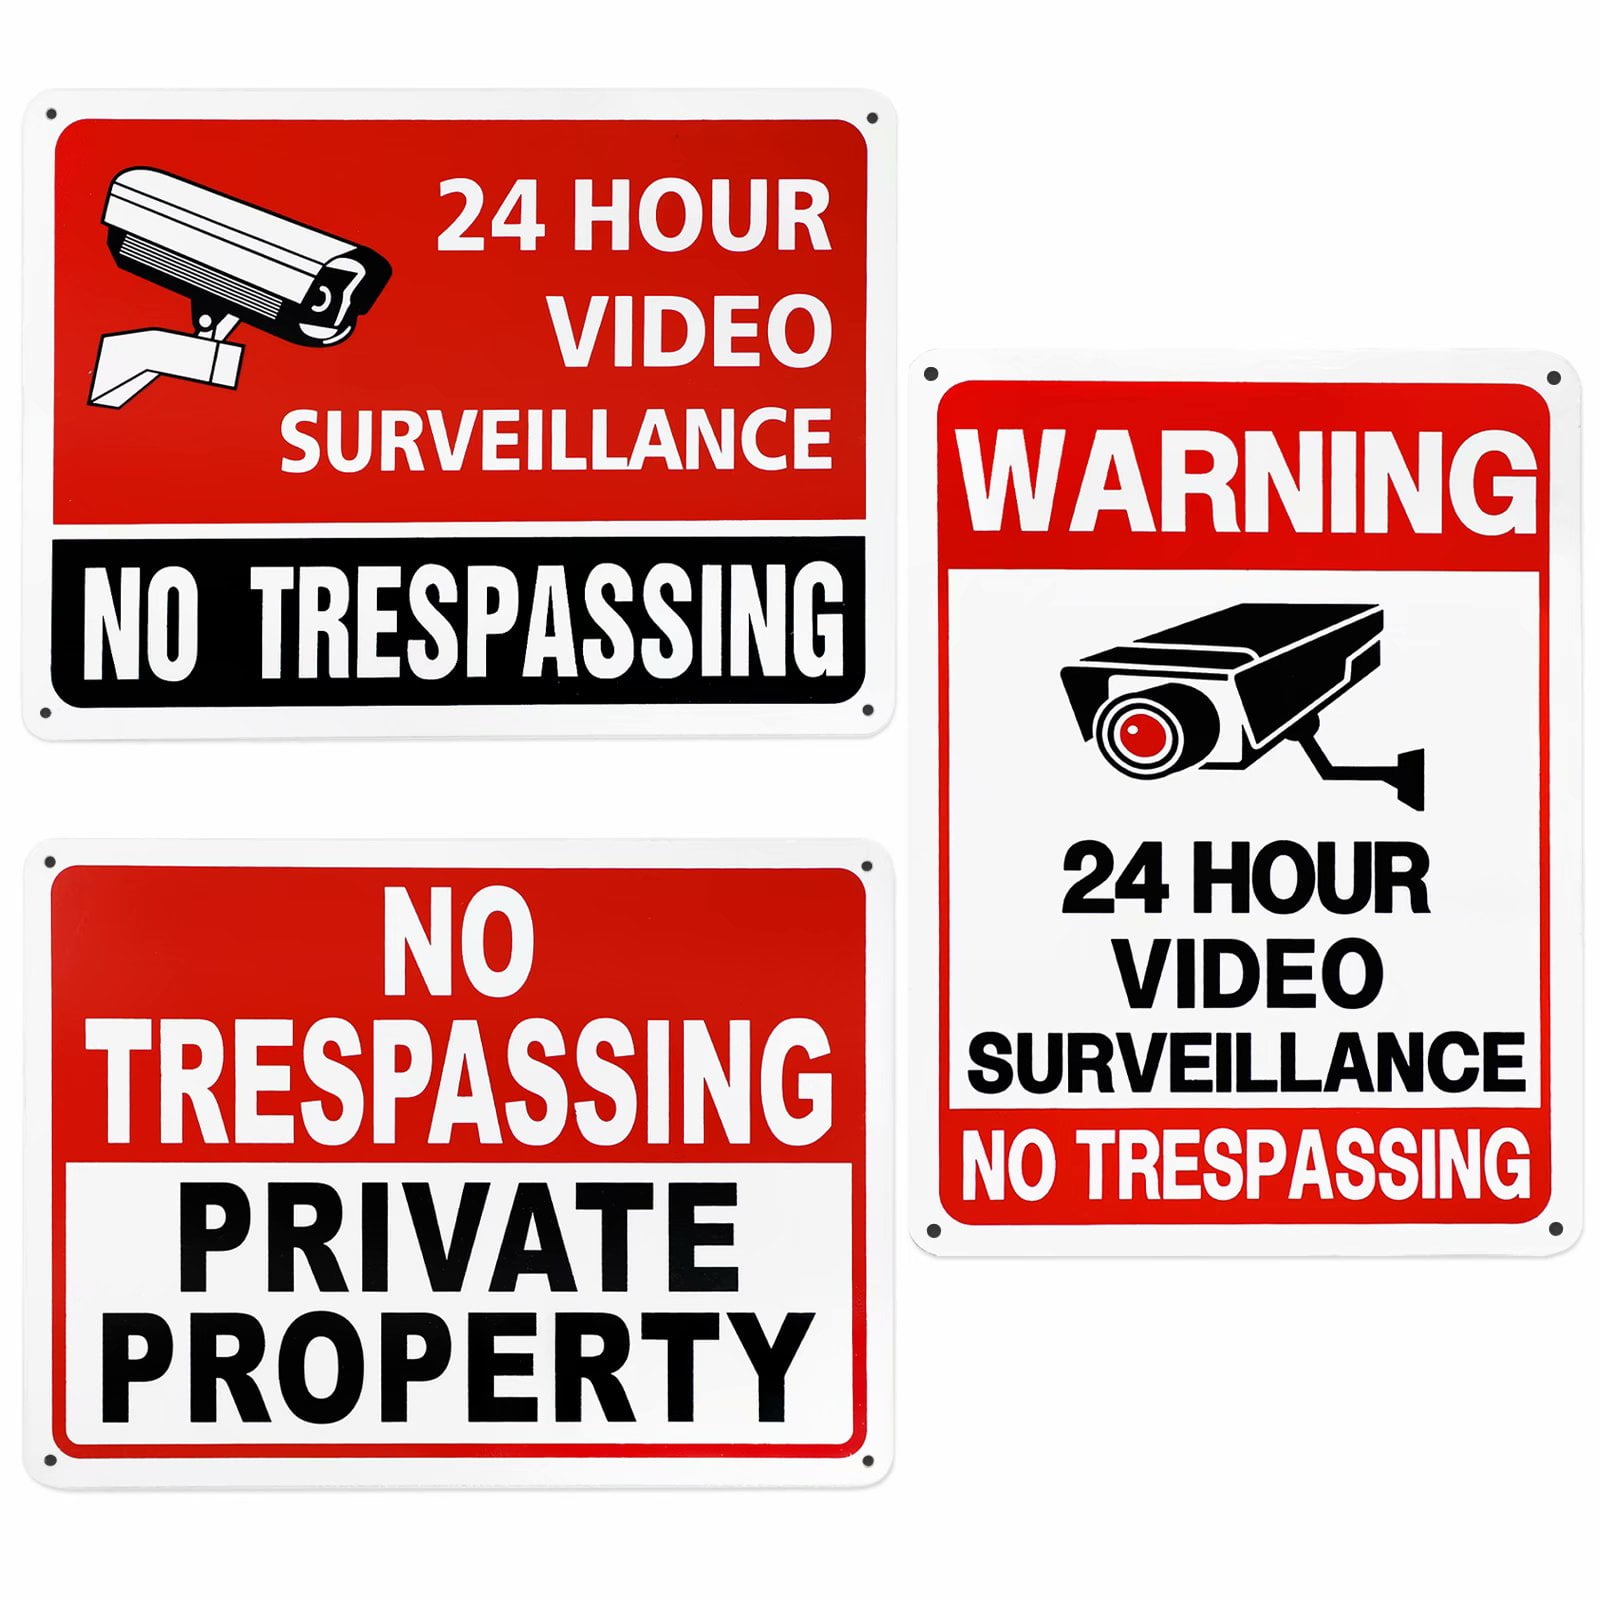 SECURITY SYSTEM VIDEO SURVEILLANCE CAMERAS WARNING YARD SIGNS+STICKERS LOT 